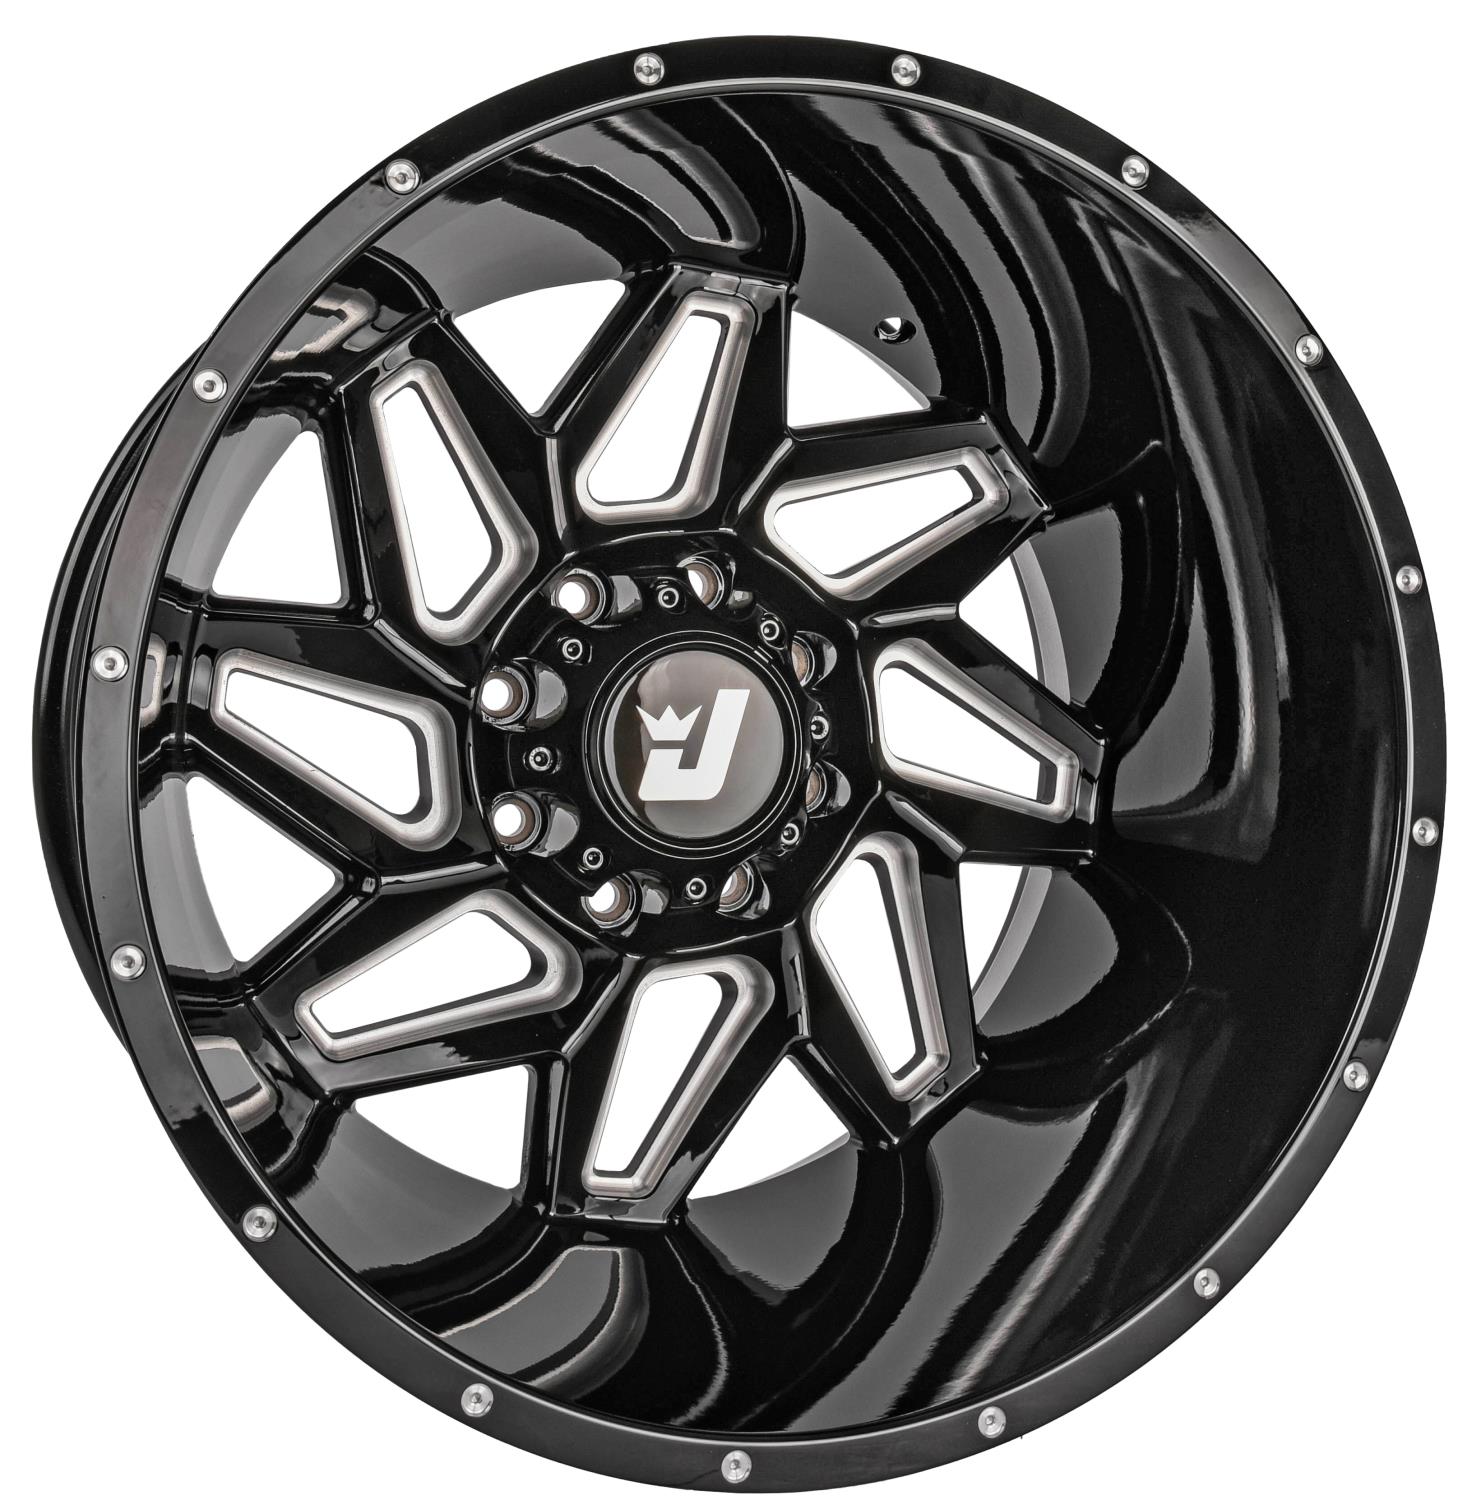 Catalyst Wheel [Size: 22" x 14"] Gloss Black with Milled Spokes